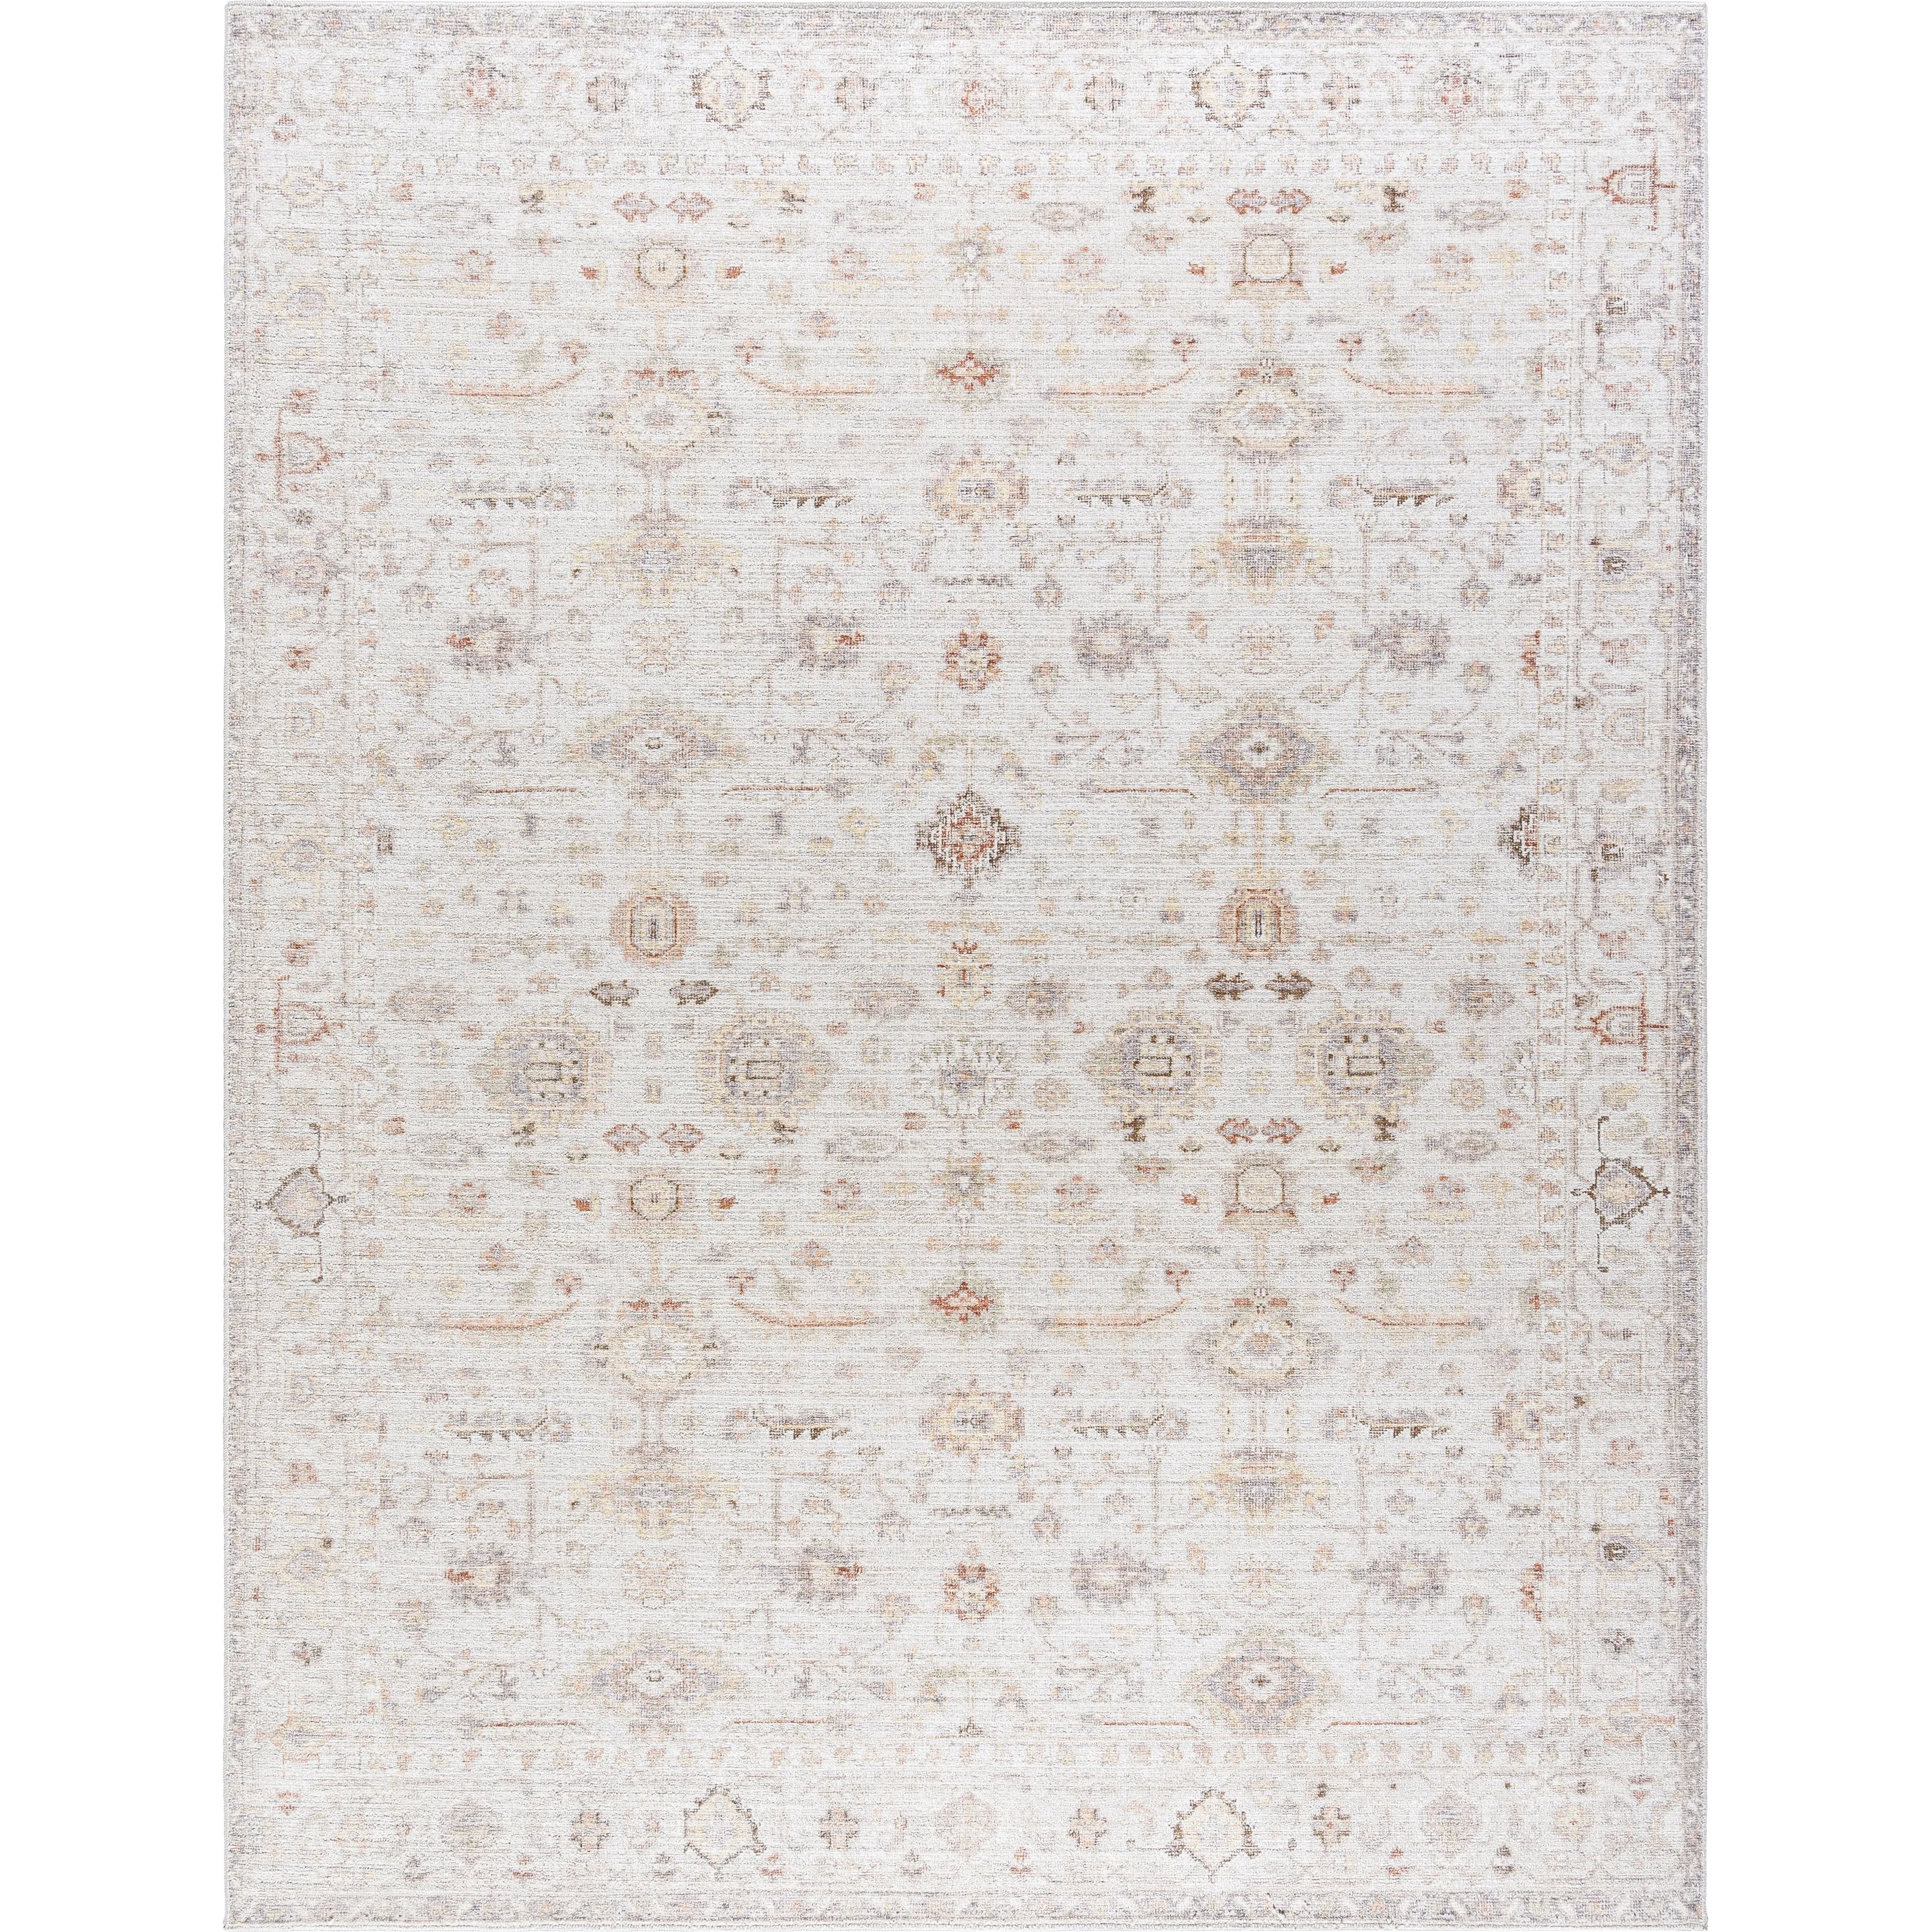 PNW Home x Surya available at Amethyst Home shipping to Australia, UK, and Canada. Organic modern design with easy to clean rugs for a family home in  the Scottsdale metro area.